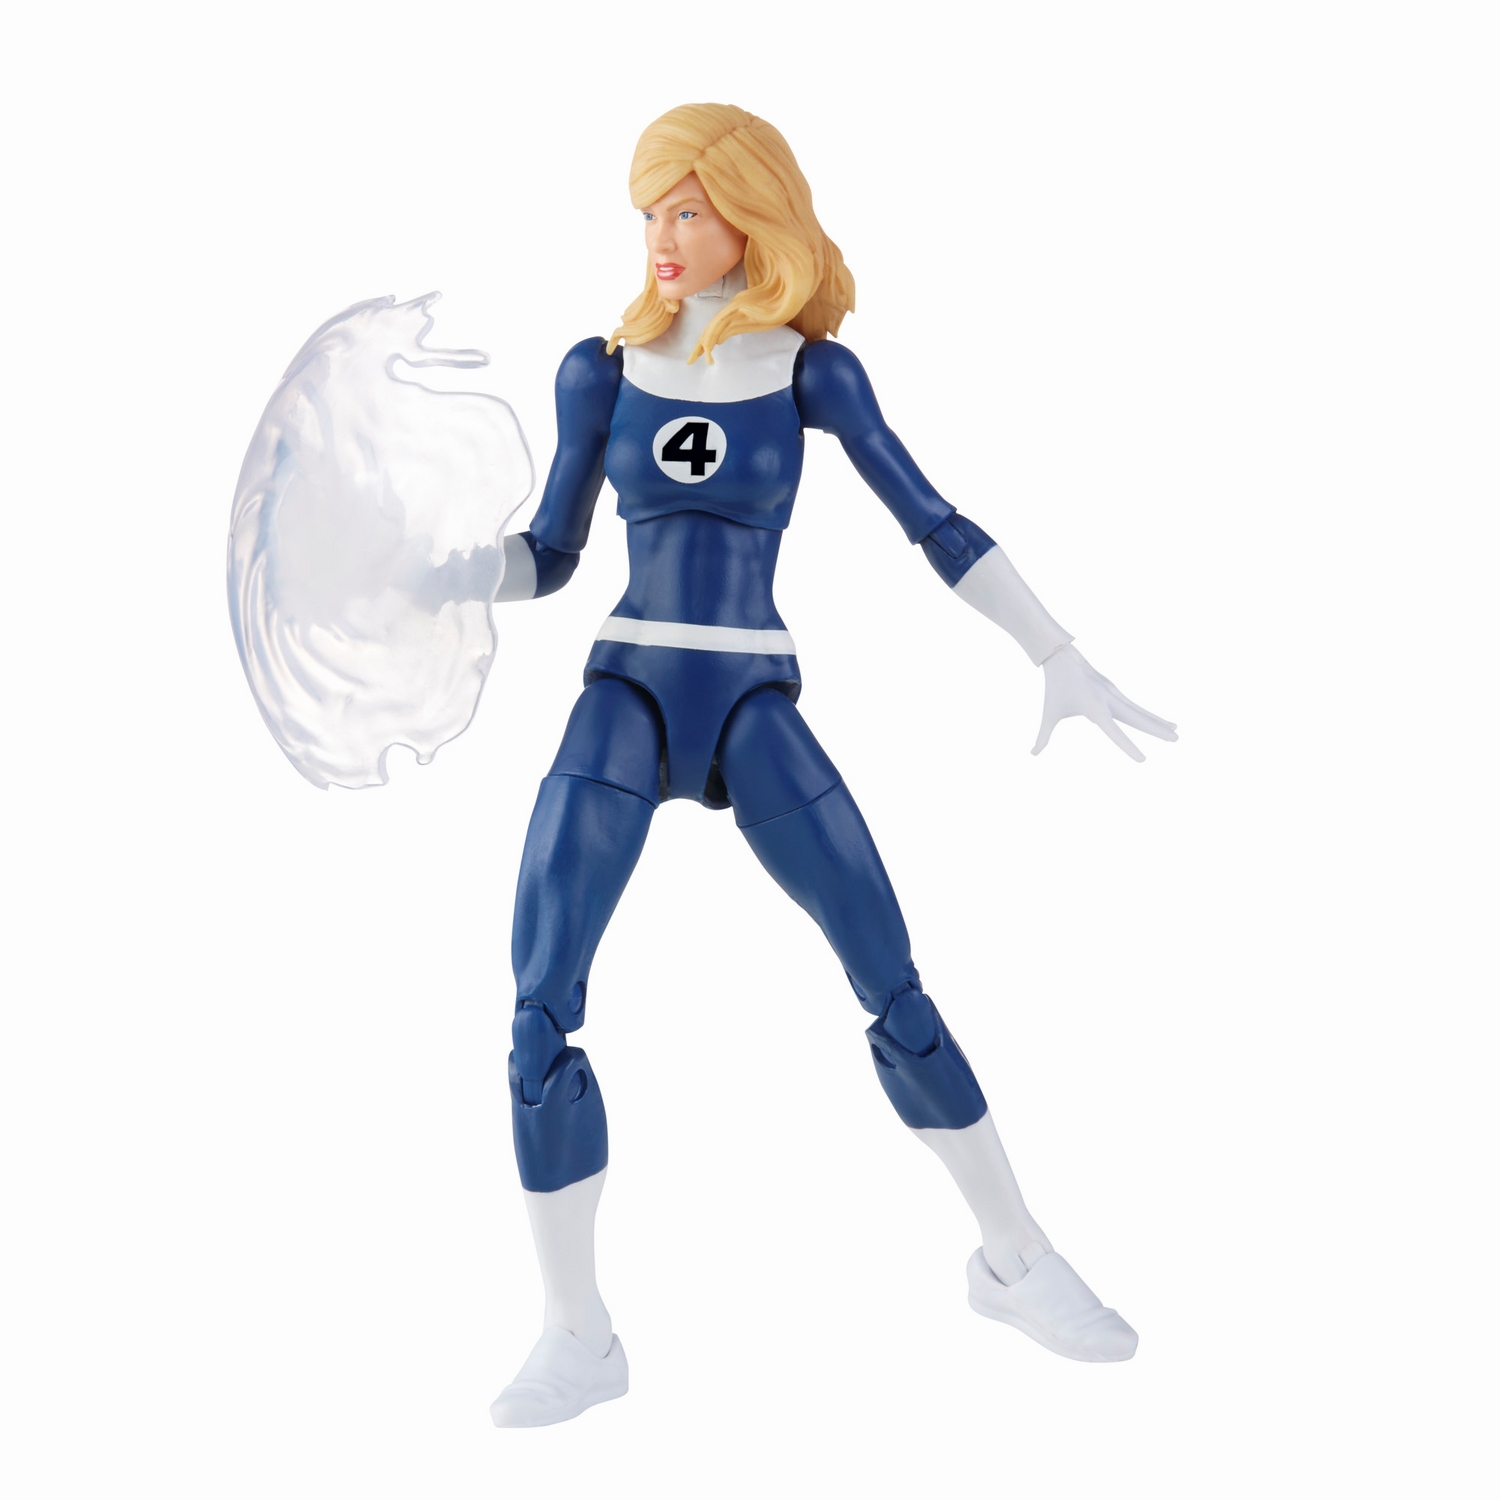 MARVEL LEGENDS SERIES 6-INCH RETRO FANTASTIC FOUR MARVEL'S INVISIBLE WOMAN Figure_oop 3.jpg